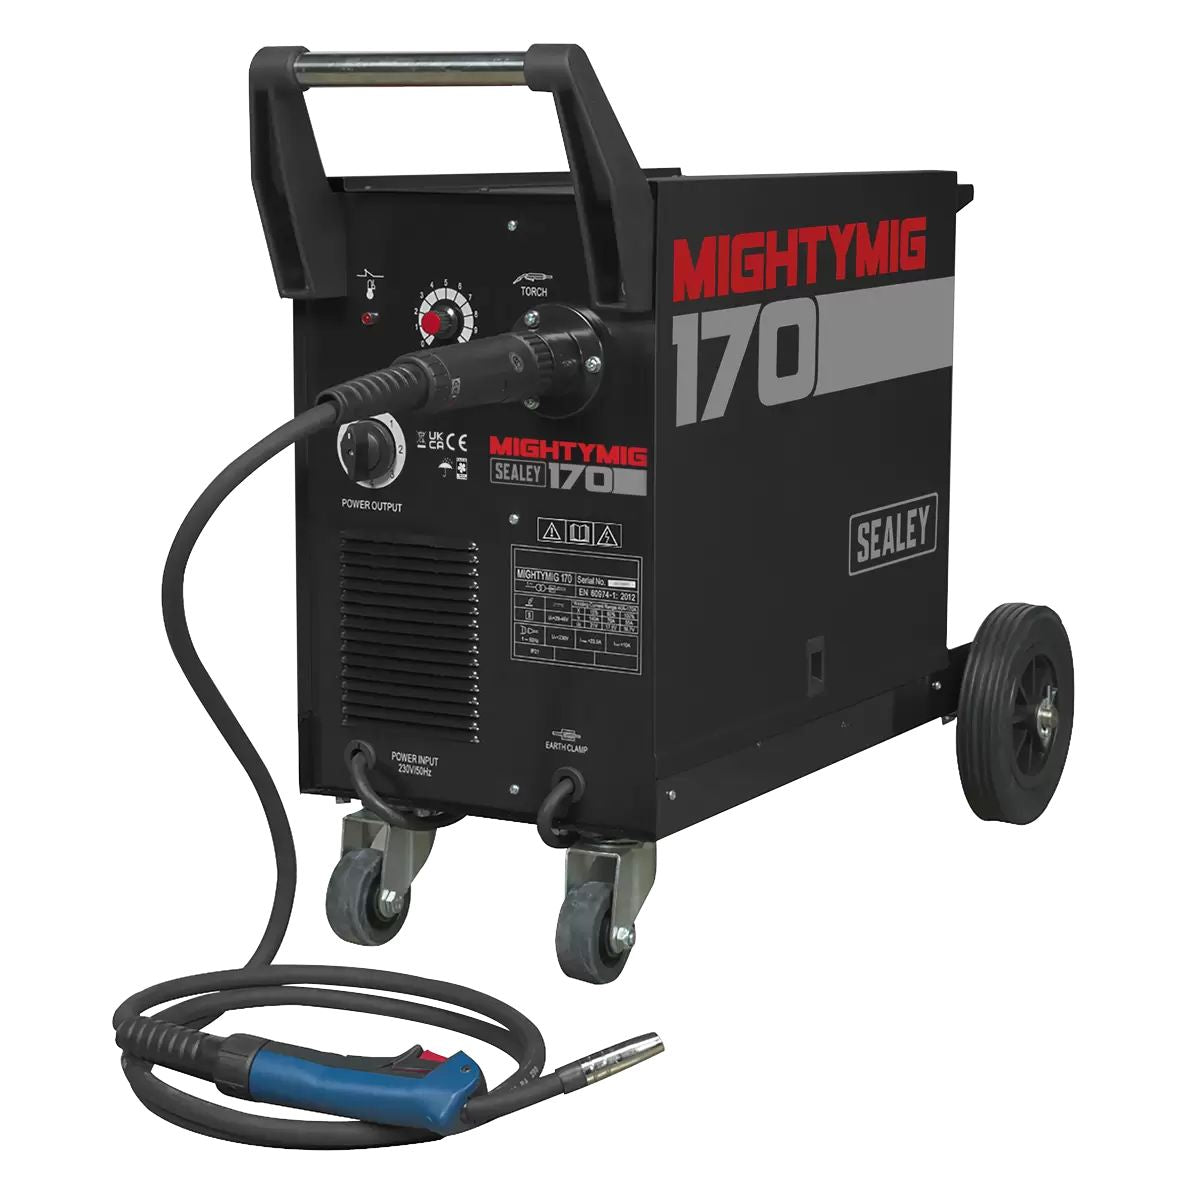 Sealey MIGHTYMIG170 170A Professional Gas-Gasless MIG Welder with Euro Torch 230V